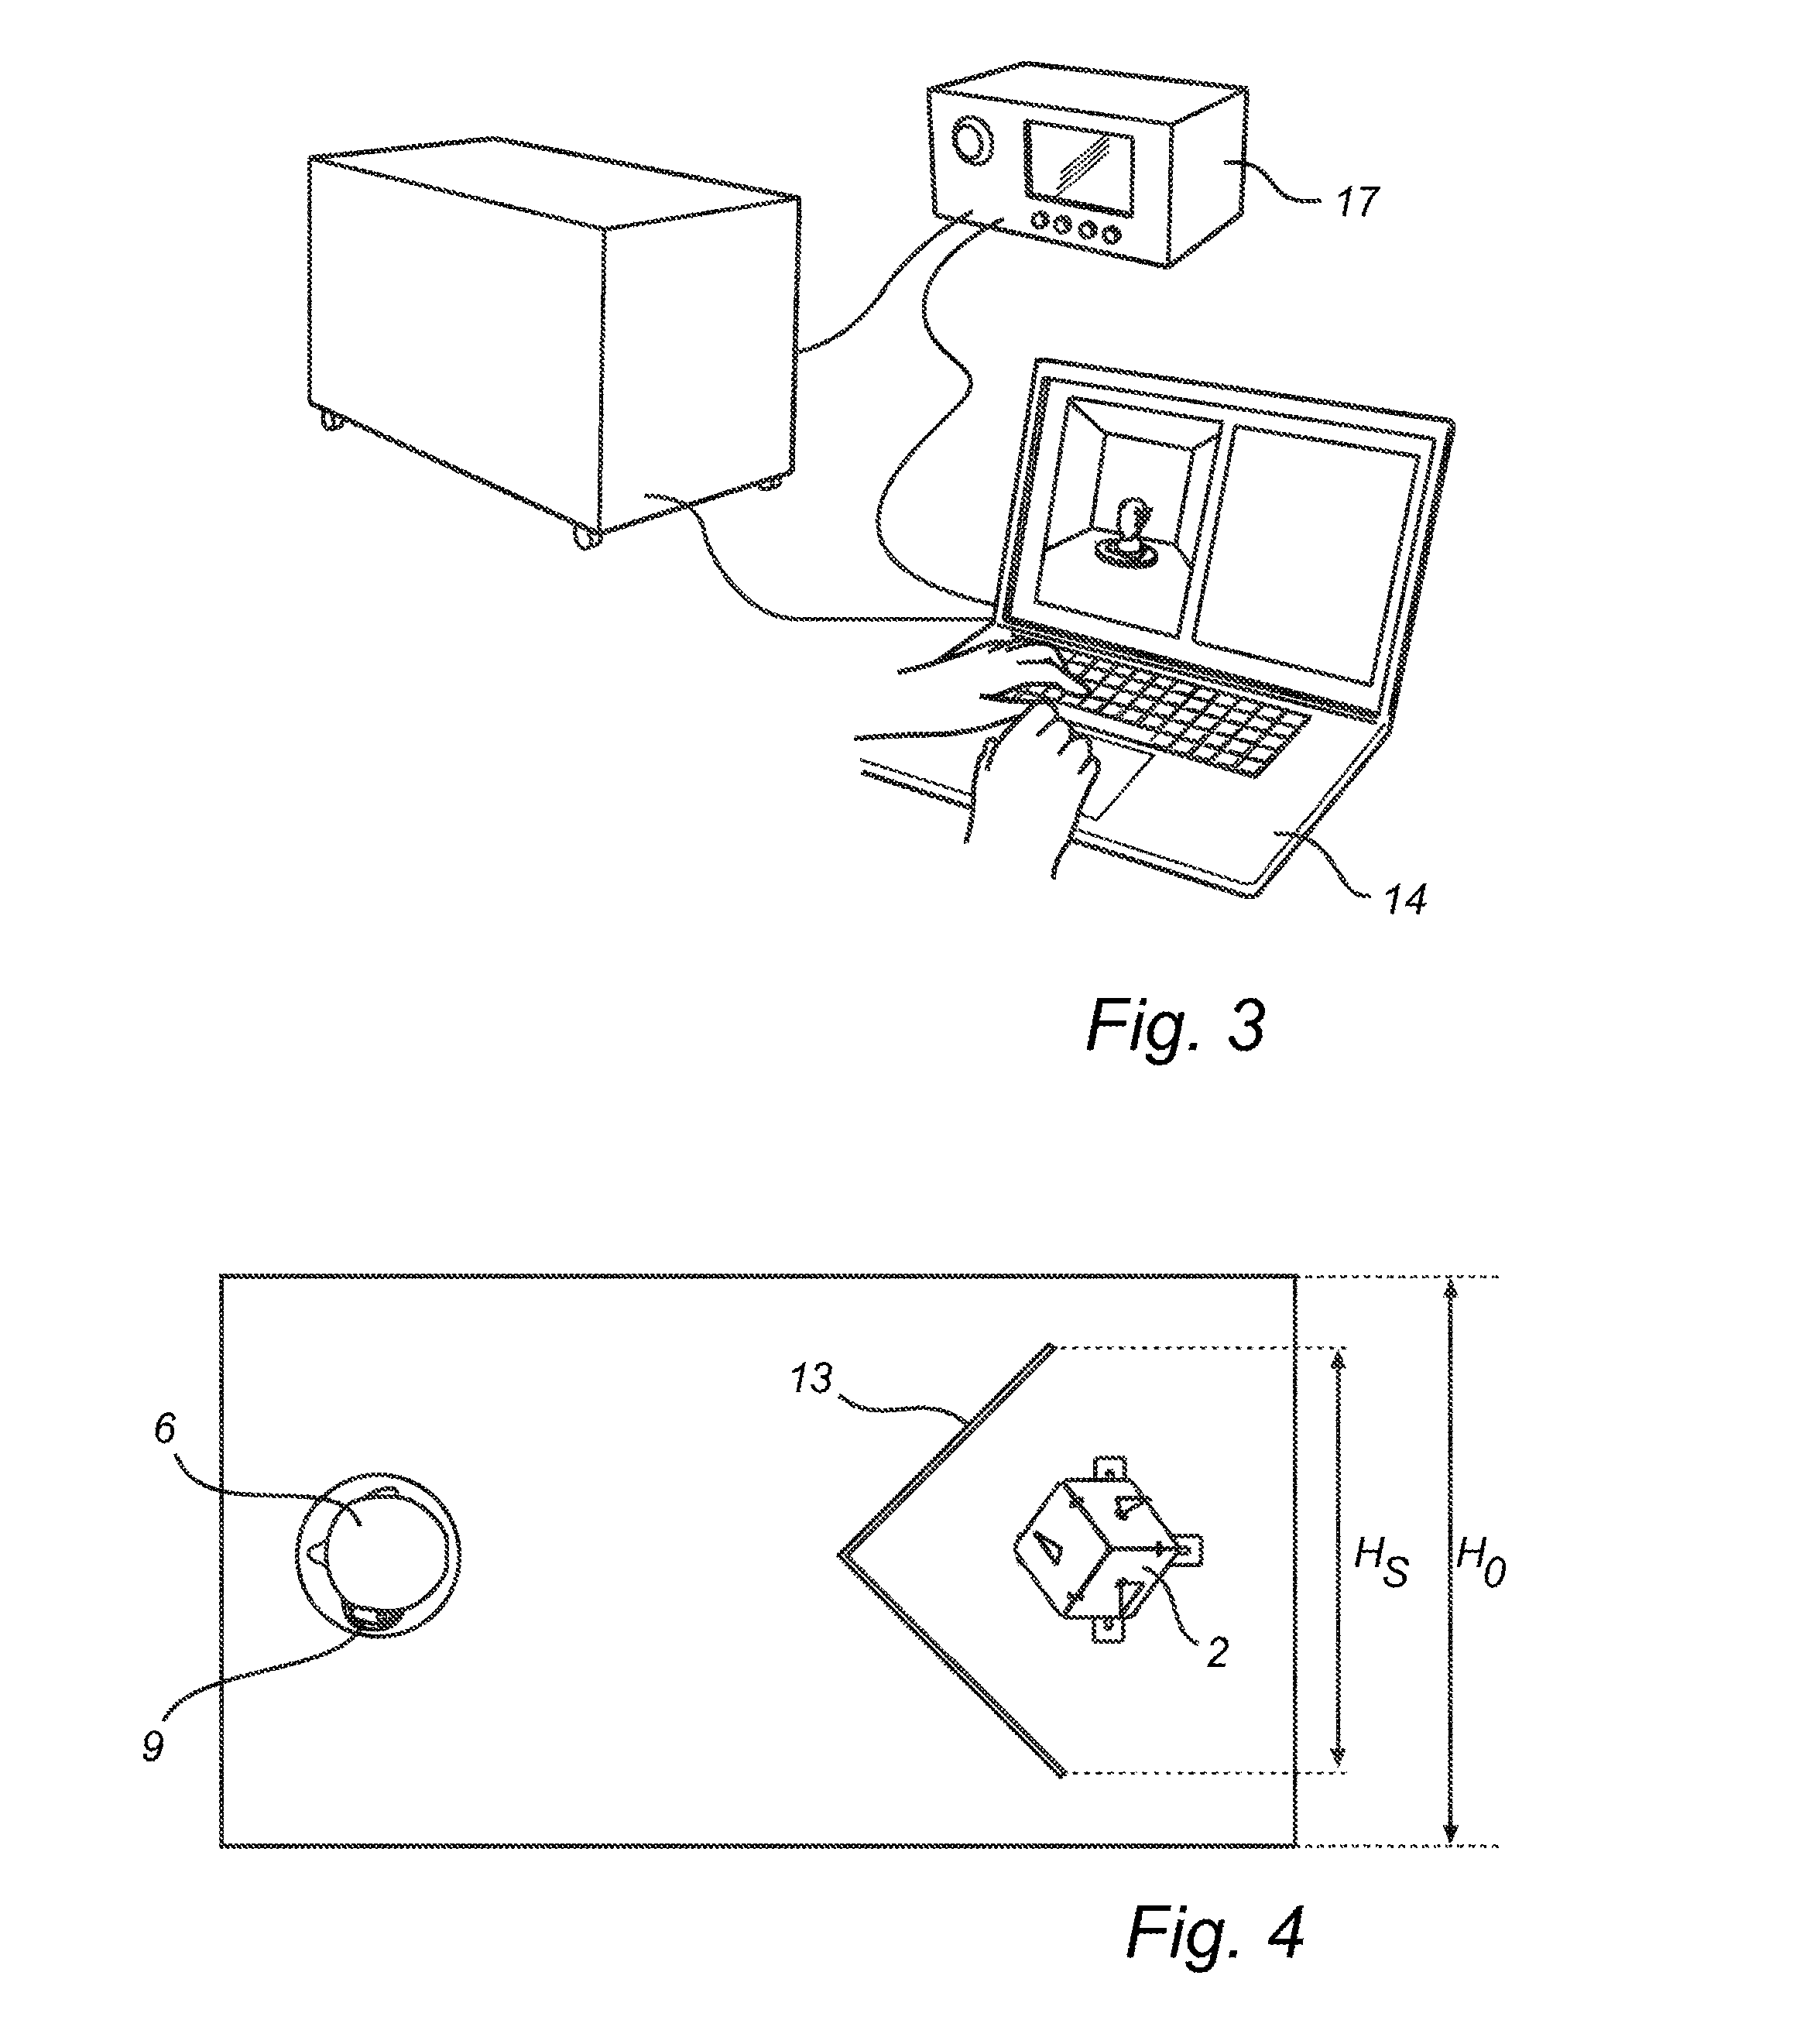 Method and apparatus for measuring the performance of antennas, mobile phones and other wireless terminals